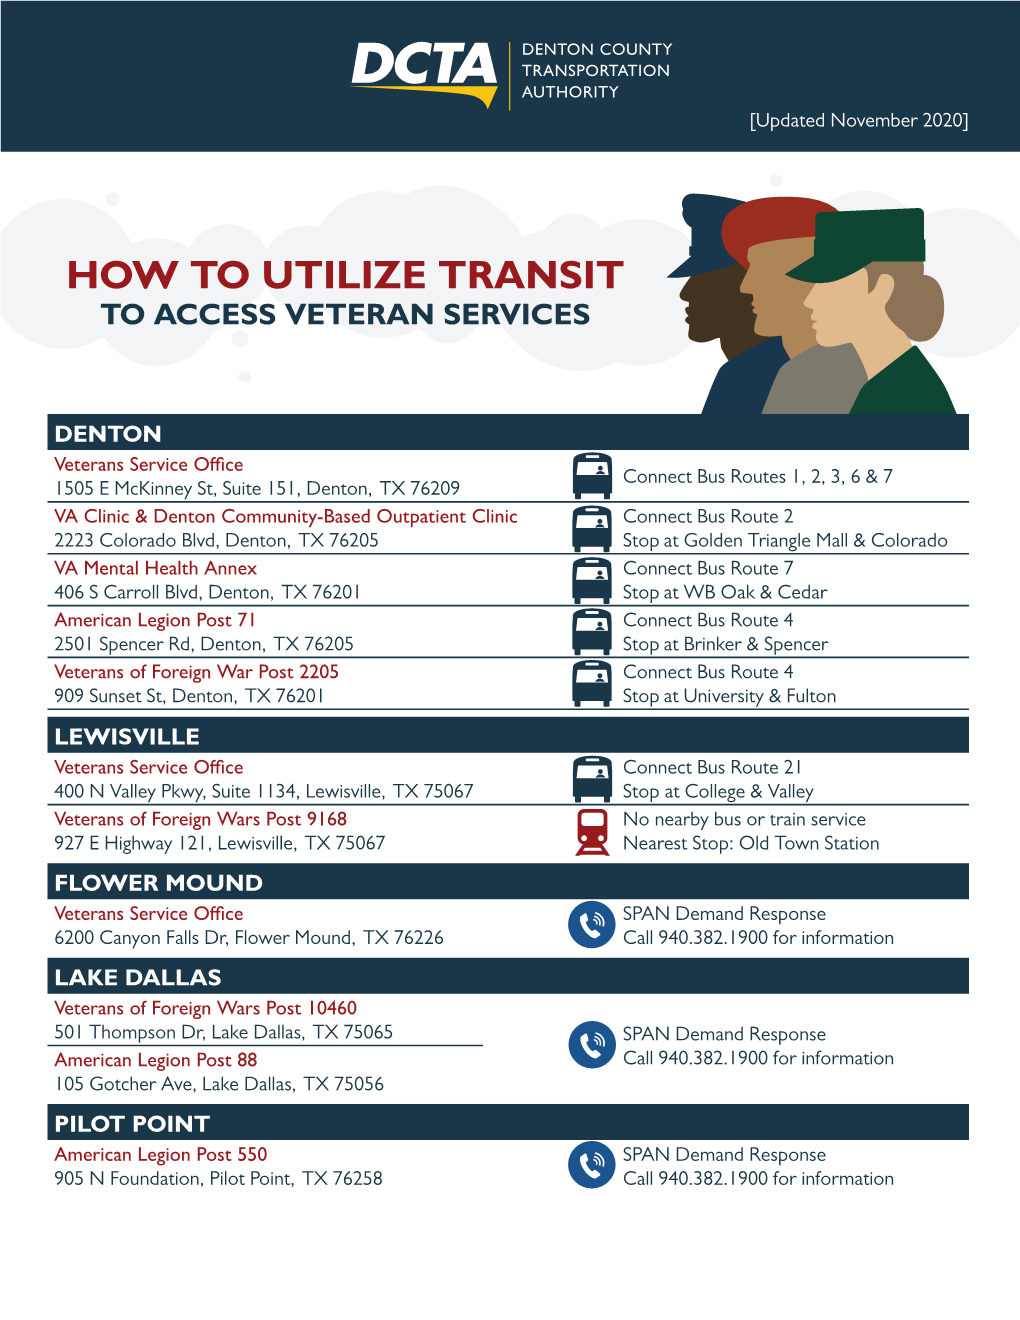 How to Utilize Transit to Access Veteran Services